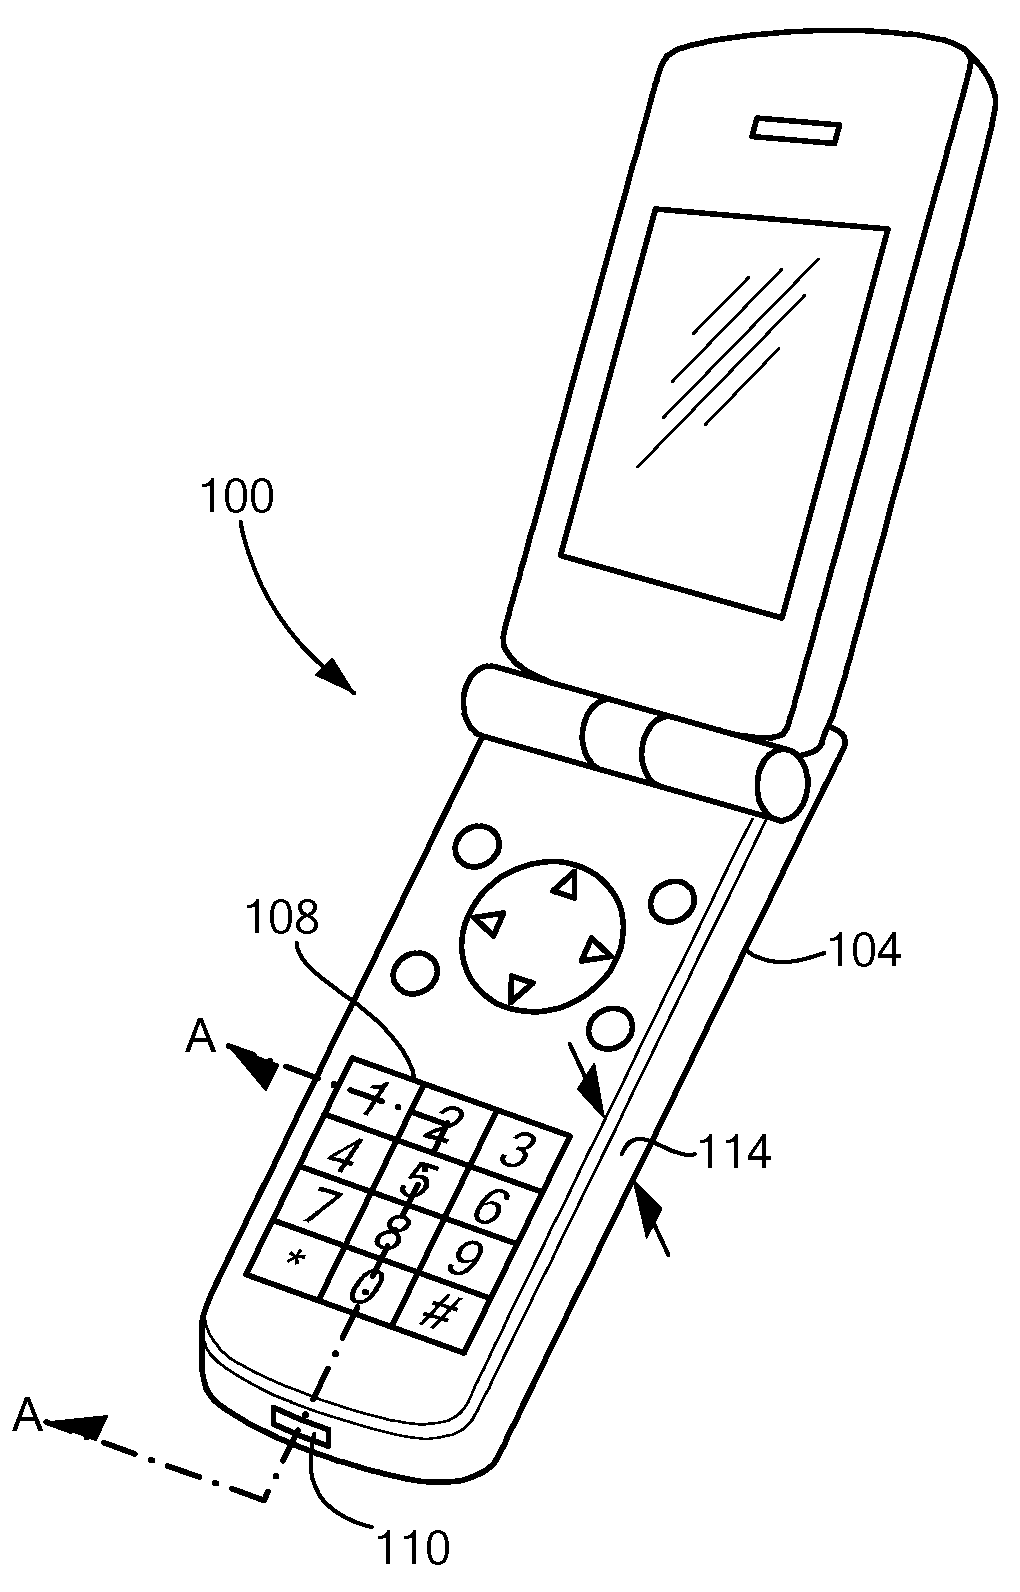 Side-ported MEMS microphone assembly